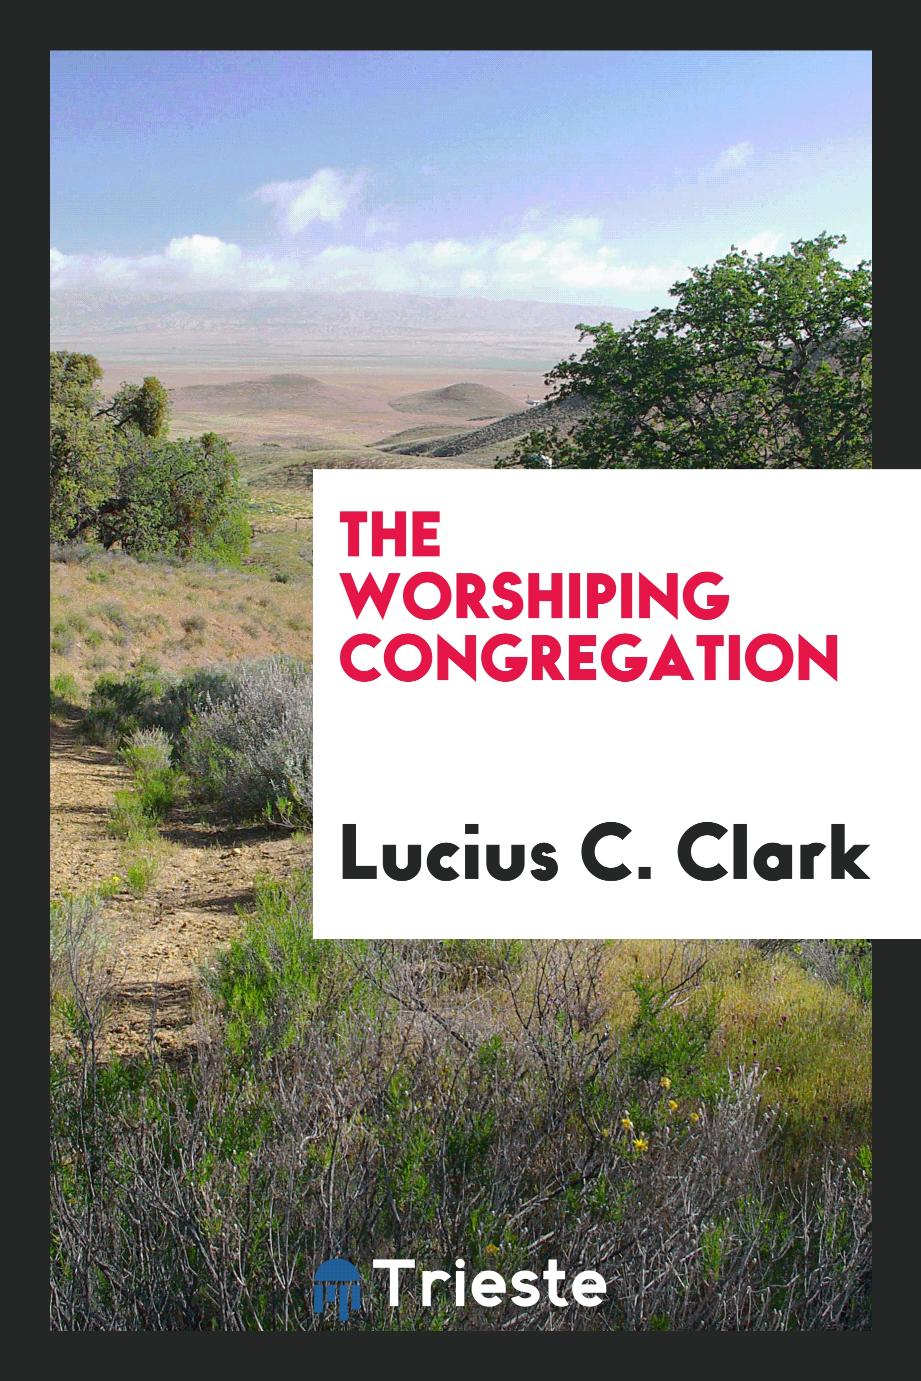 The worshiping congregation